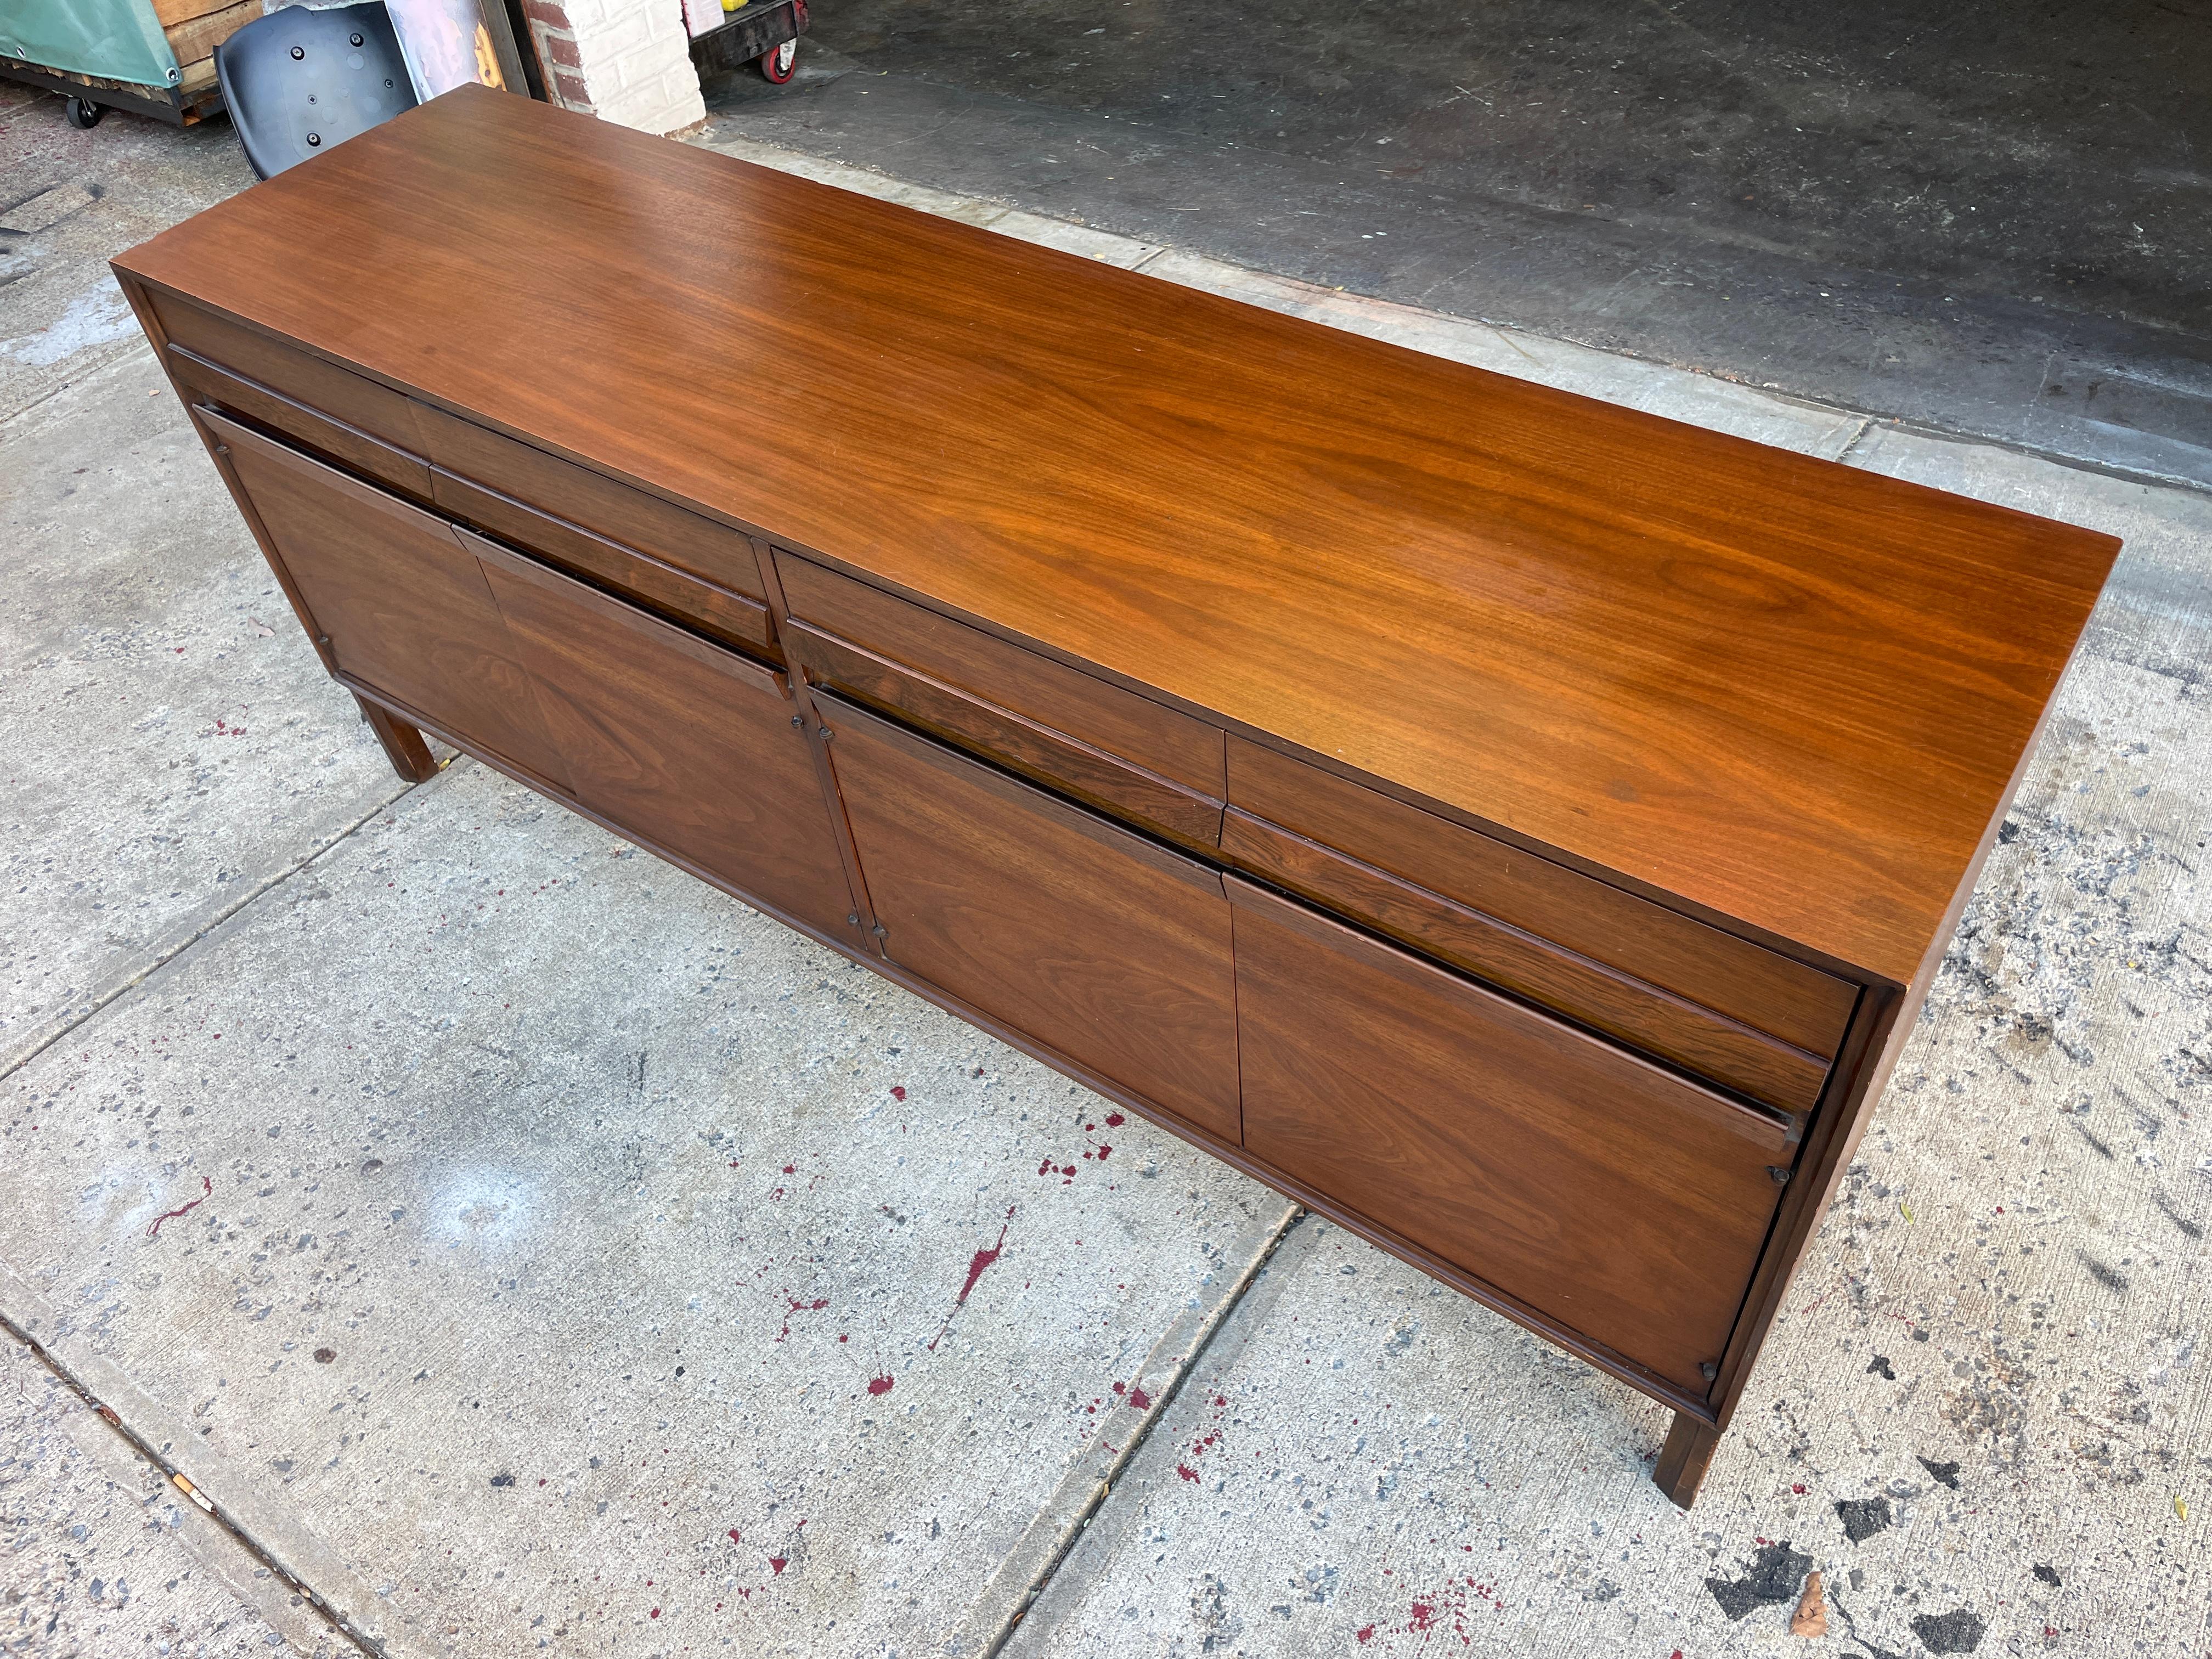 Mid-Century Modern American of Martinsville 4 drawer - 4 door credenza walnut. All Original Vintage condition - Dark brown walnut shows little wear - Solid wood handles. All drawers slide smooth and clean inside. Has a shelf on one side and a few